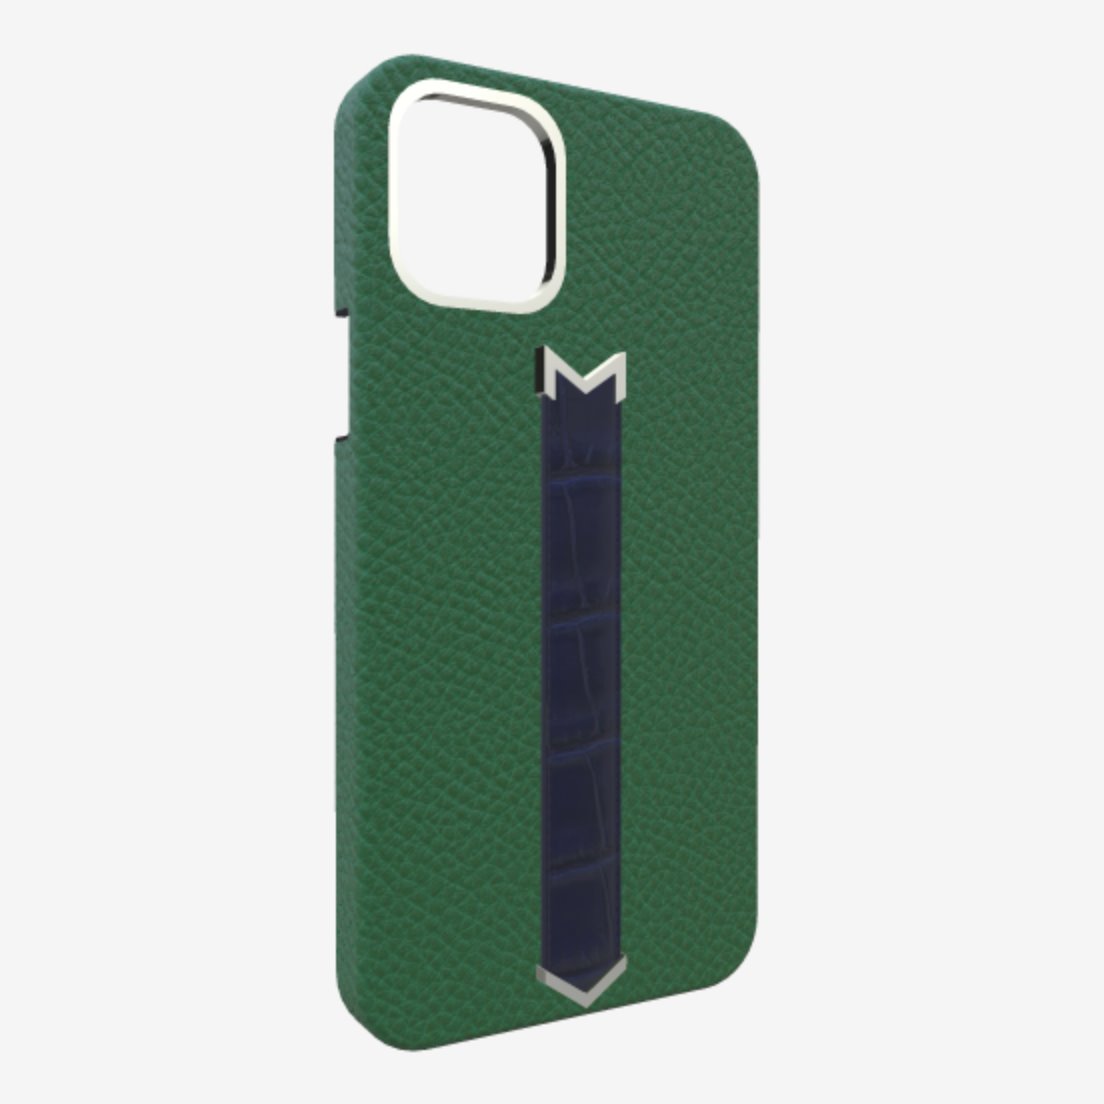 Silver Finger Strap Case for iPhone 13 in Genuine Calfskin and Alligator Emerald-Green Navy-Blue 